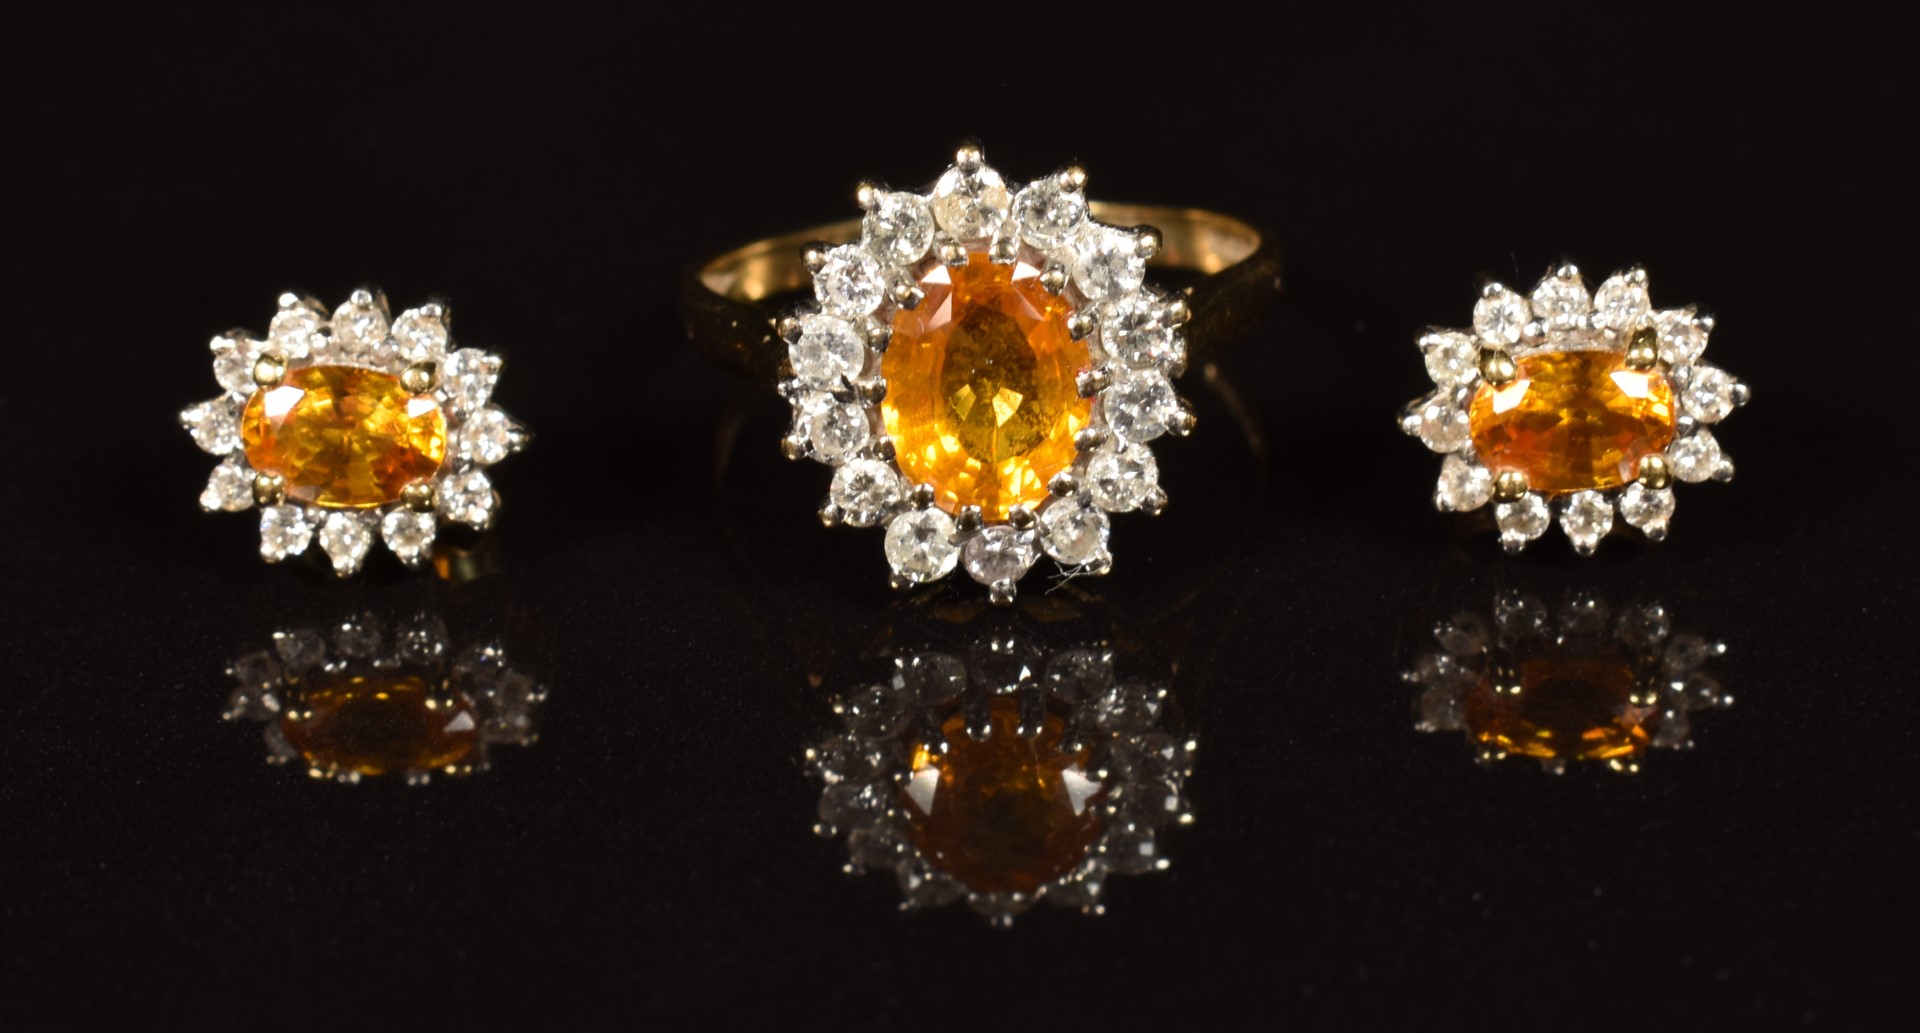 A 9k gold ring set with an oval cut orange sapphire surrounded by diamonds (size Q), with matching